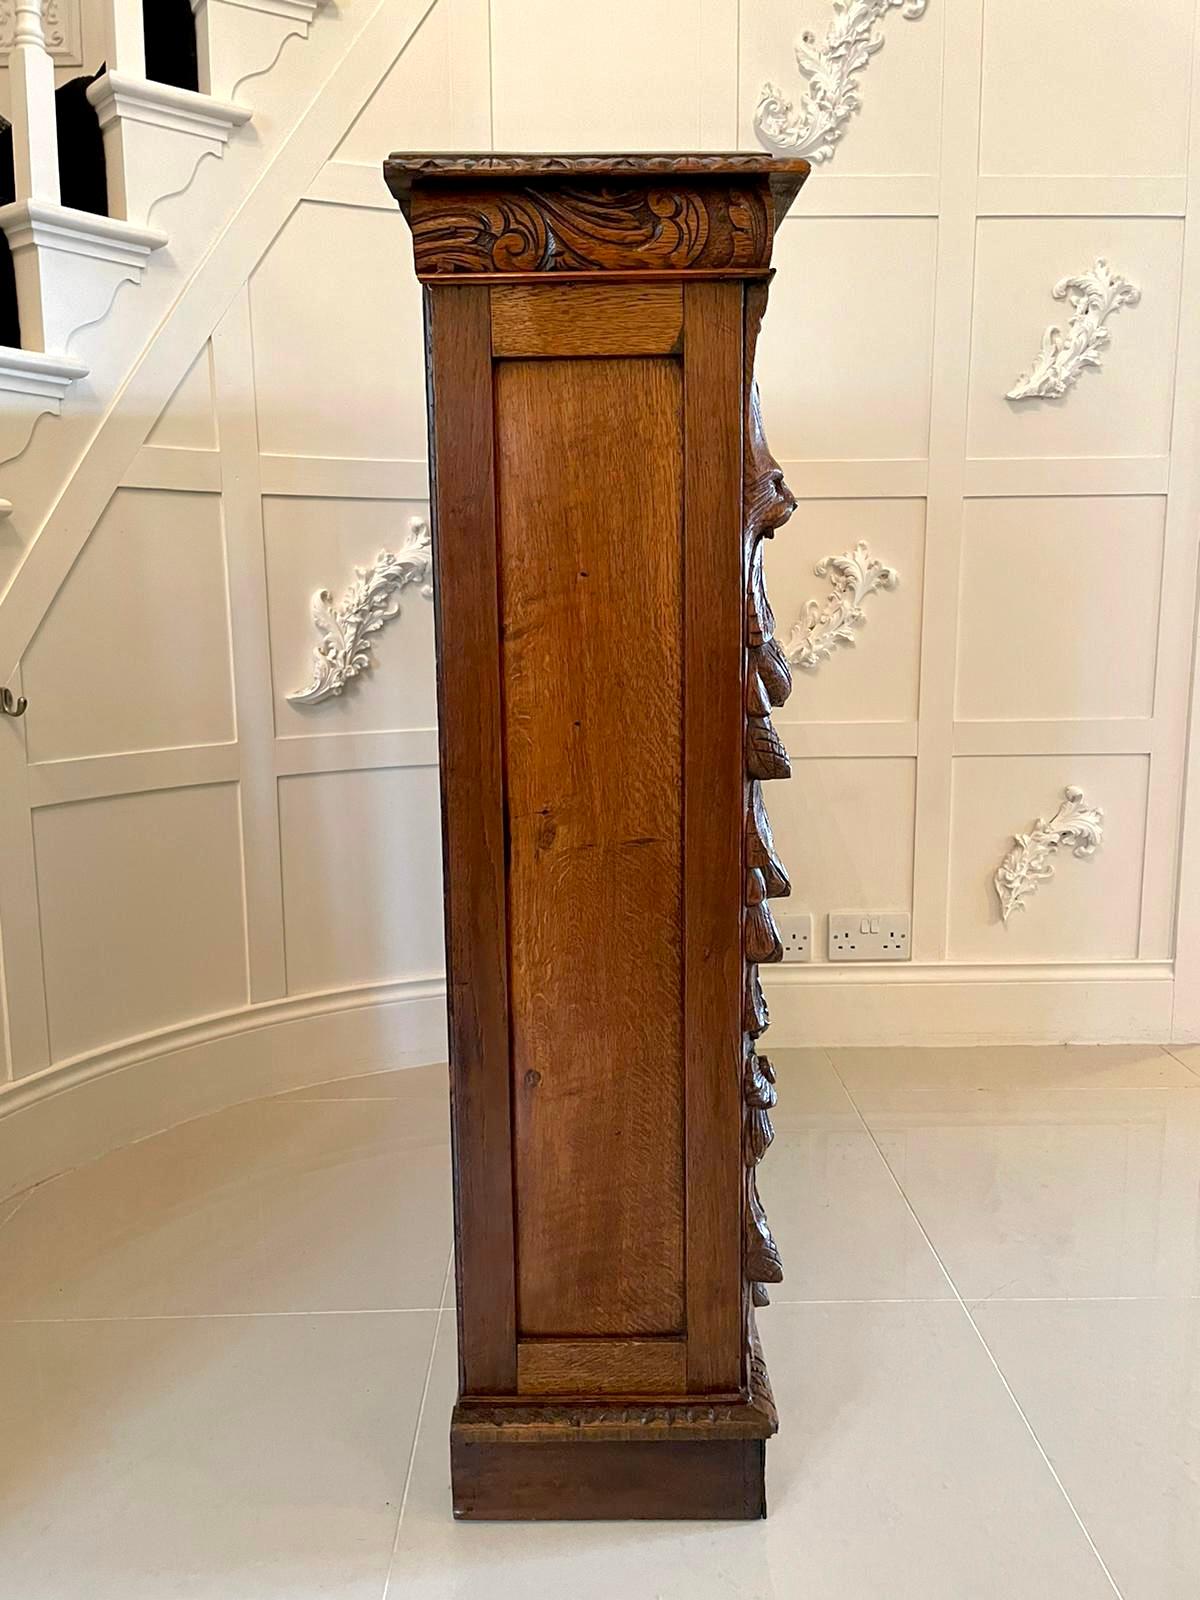 19th century antique carved oak open bookcase having an oak top with a delightful carved frieze, paneled oak sides, quality oak supports expertly carved with bird heads, fruits, flowers and oak leaves, two adjustable shelves standing on a plinth